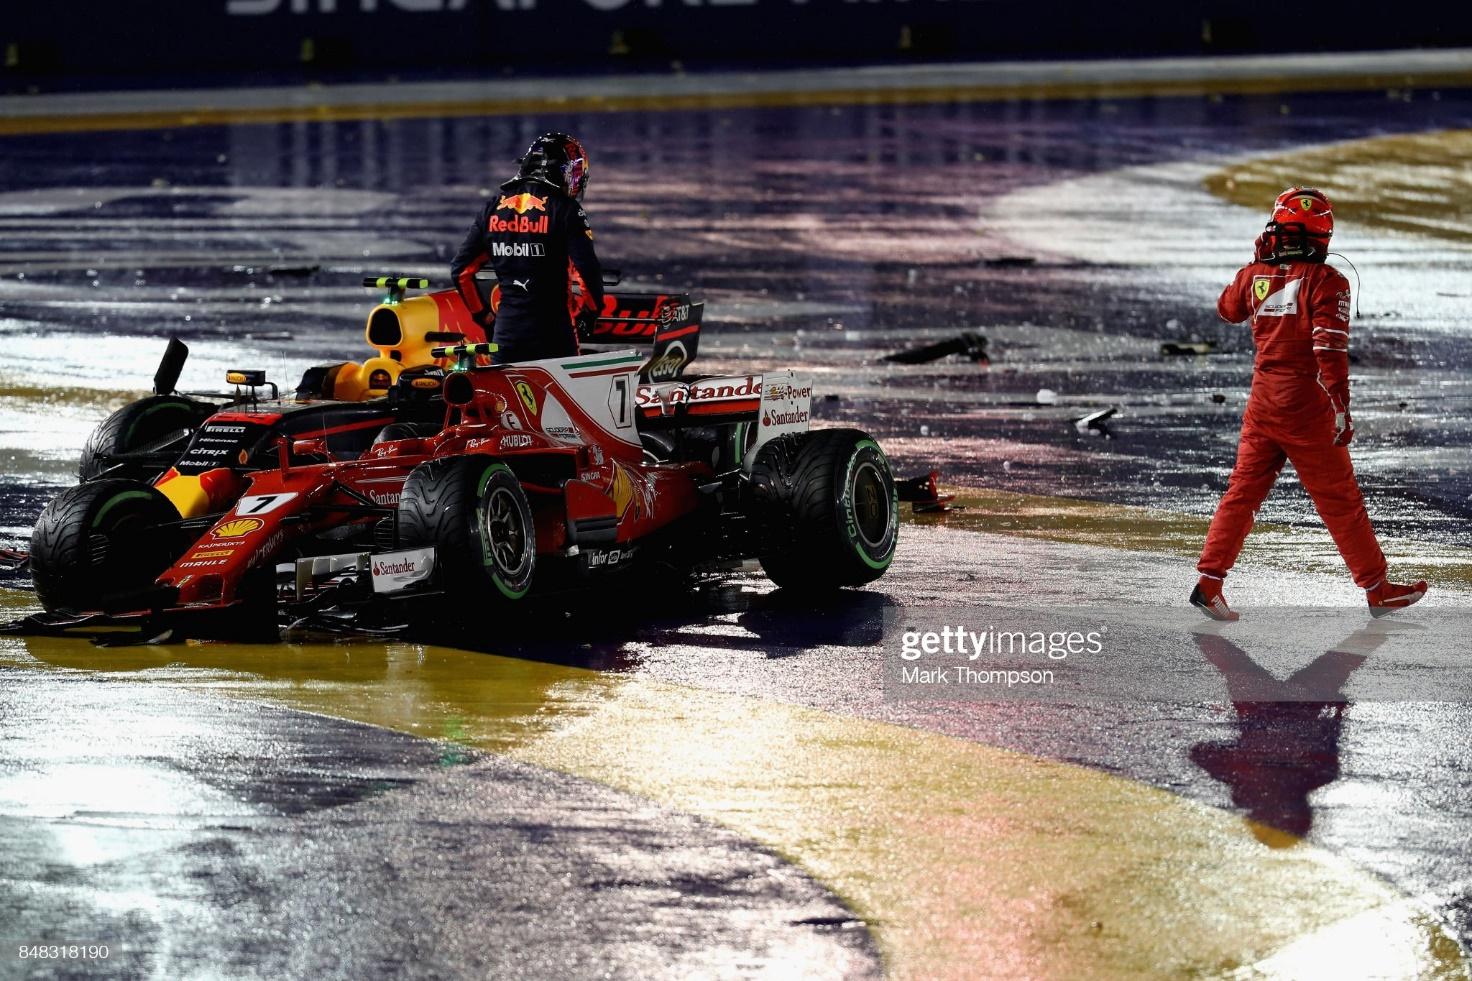 Kimi Raikkonen driving the (7) Scuderia Ferrari SF70H and Max Verstappen driving the (33) Red Bull RB13 stop at the side of the circuit after colliding at the start during the F1 Grand Prix of Singapore at Marina Bay Street Circuit on September 17, 2017.